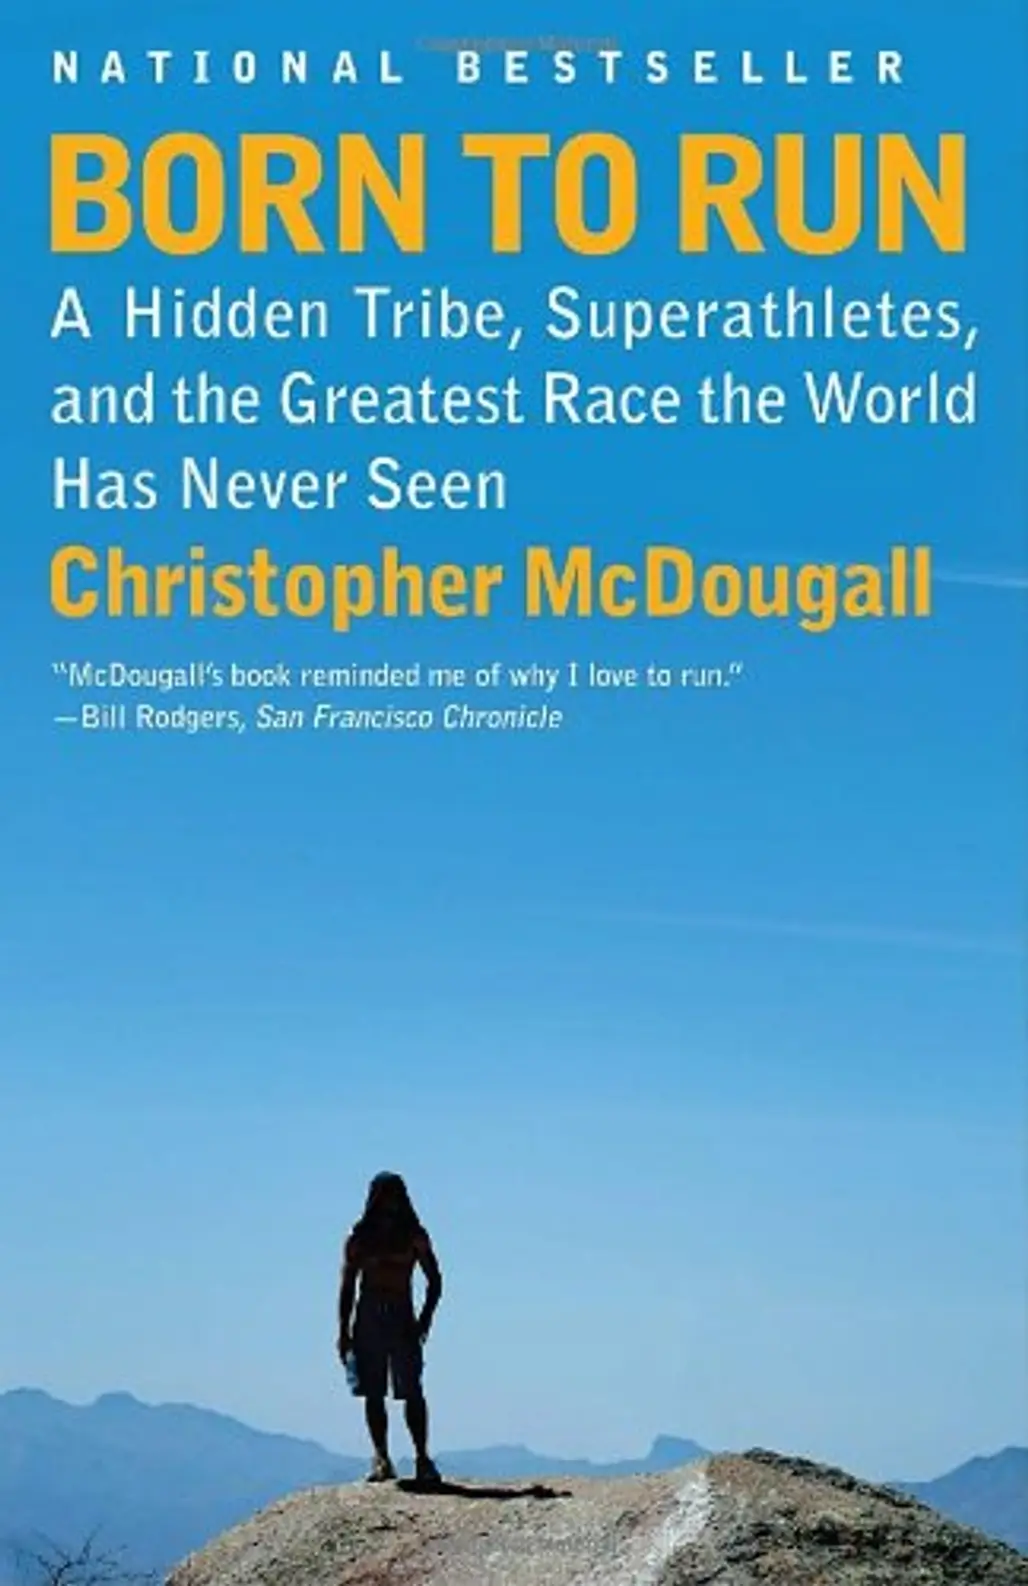 Born to Run, by Christopher McDougall